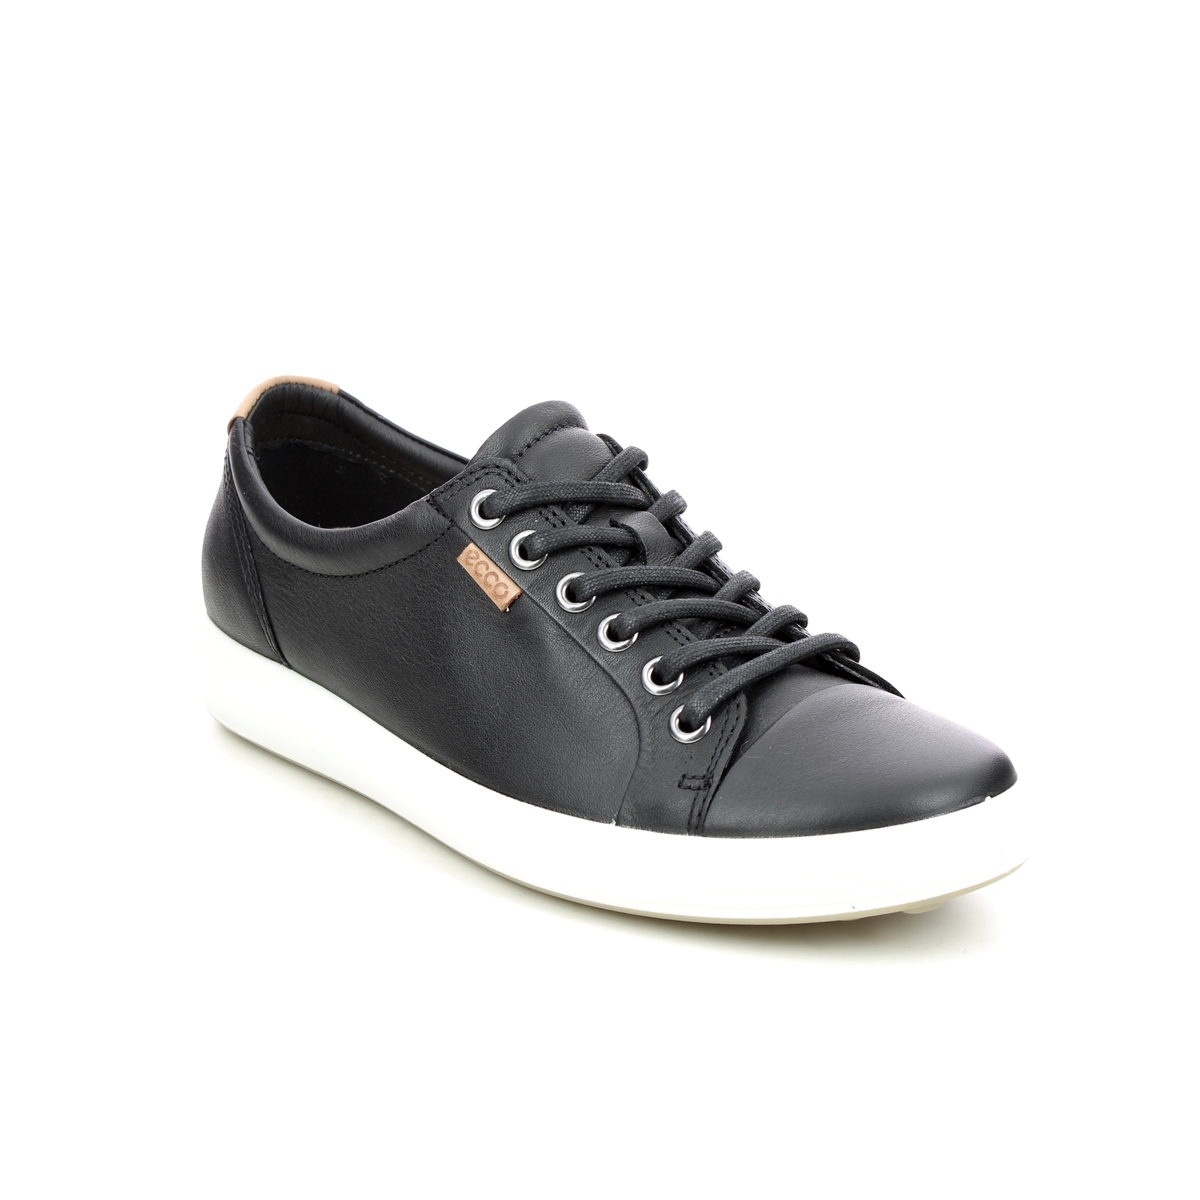 Ecco Soft 7 Lace Black Leather Womens Trainers 430003-01001 In Size 39 In Plain Black Leather